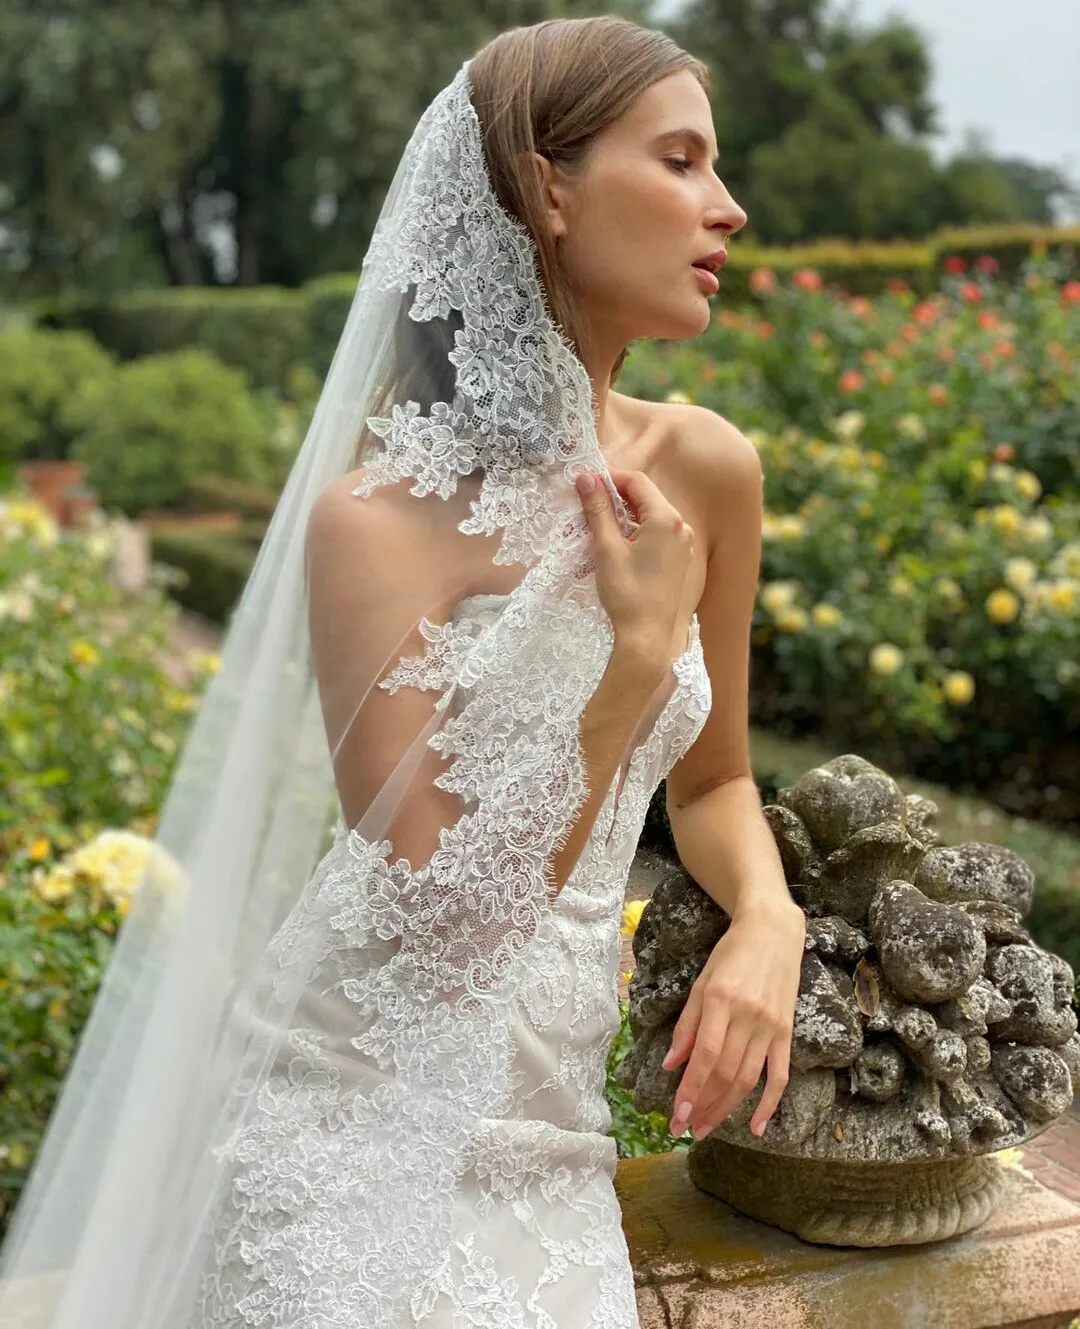 https://ae01.alicdn.com/kf/H1626bac2cc504ffcb36ff40549ca6a23y/400cm-Long-Lace-Bridal-Veils-Soft-Tulle-1-Tier-Wedding-Veil-with-Comb-Ivory-White-Custom.jpg